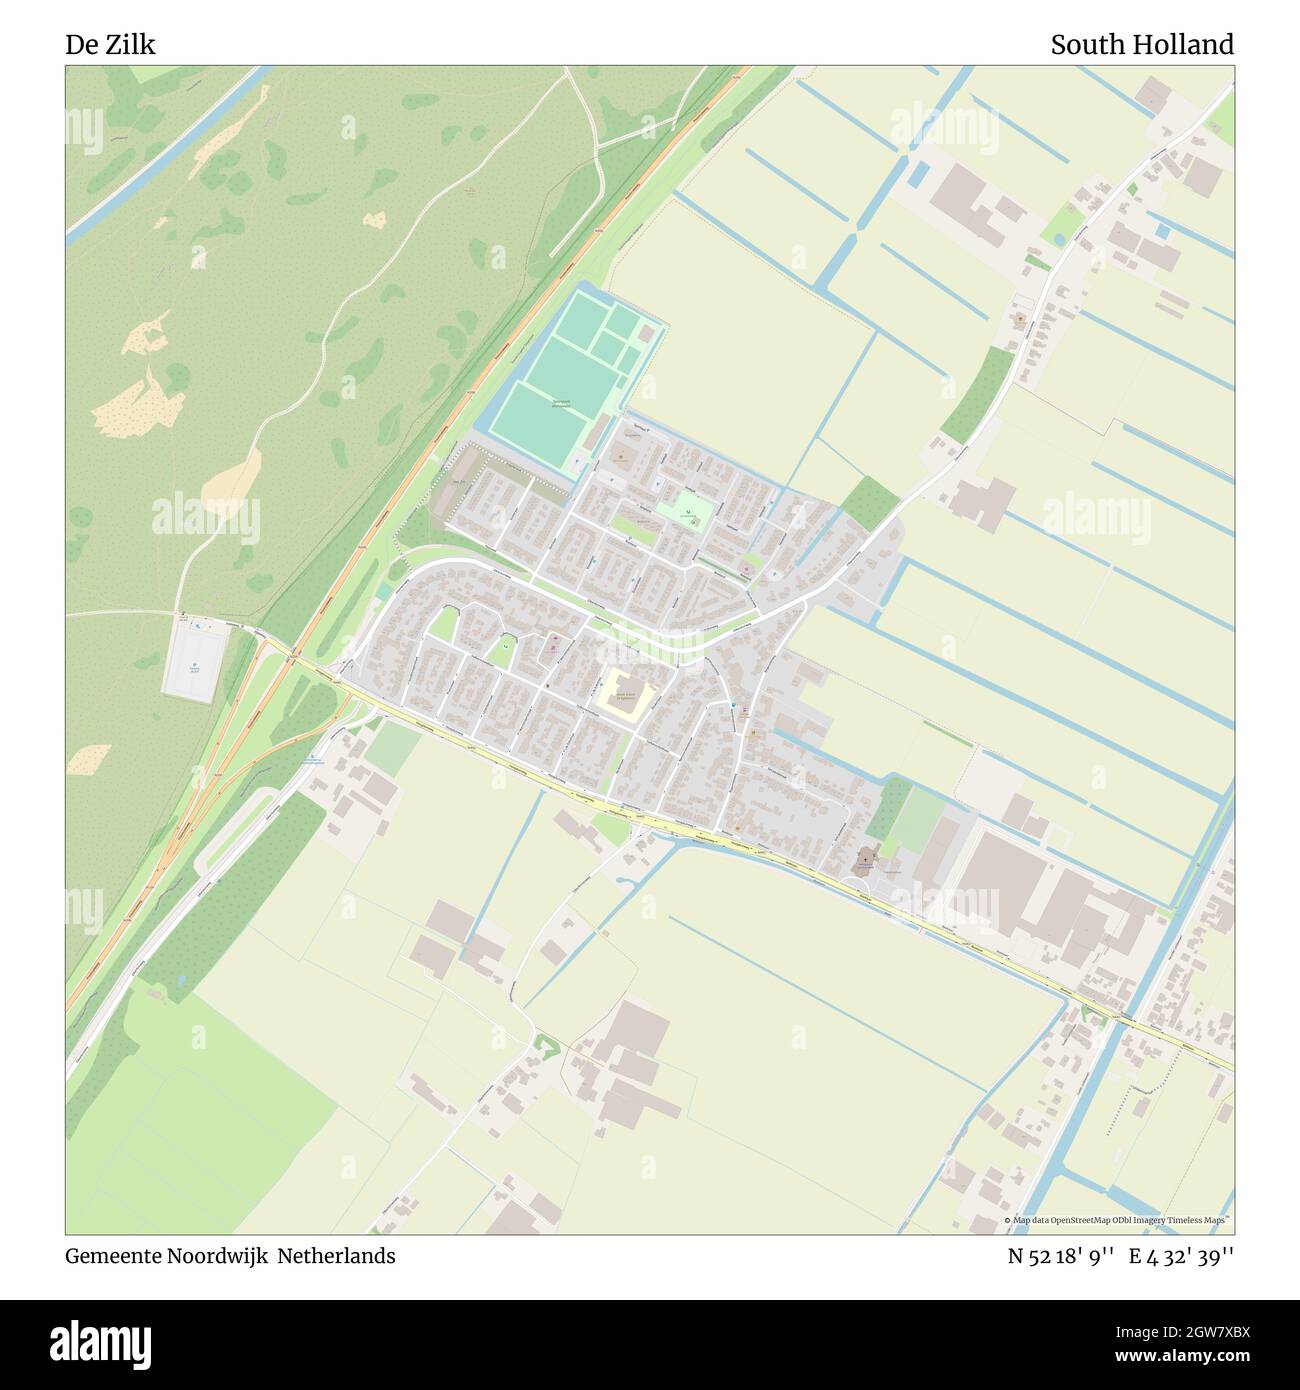 De Zilk, Gemeente Noordwijk, Netherlands, South Holland, N 52 18' 9'', E 4 32' 39'', map, Timeless Map published in 2021. Travelers, explorers and adventurers like Florence Nightingale, David Livingstone, Ernest Shackleton, Lewis and Clark and Sherlock Holmes relied on maps to plan travels to the world's most remote corners, Timeless Maps is mapping most locations on the globe, showing the achievement of great dreams Stock Photo